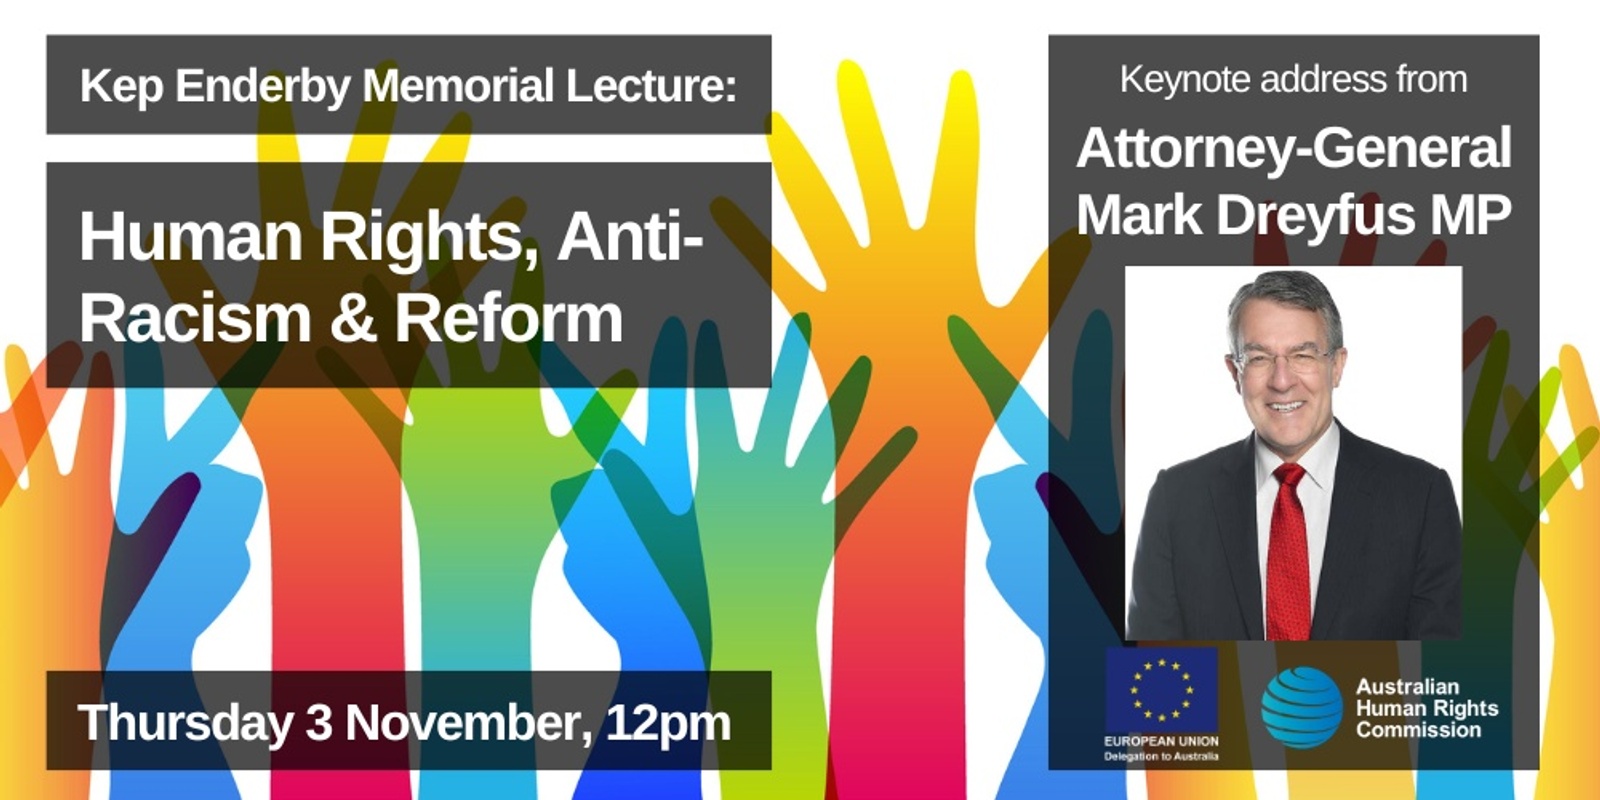 Banner image for Kep Enderby Memorial Lecture: Human Rights, Anti-Racism & Reform